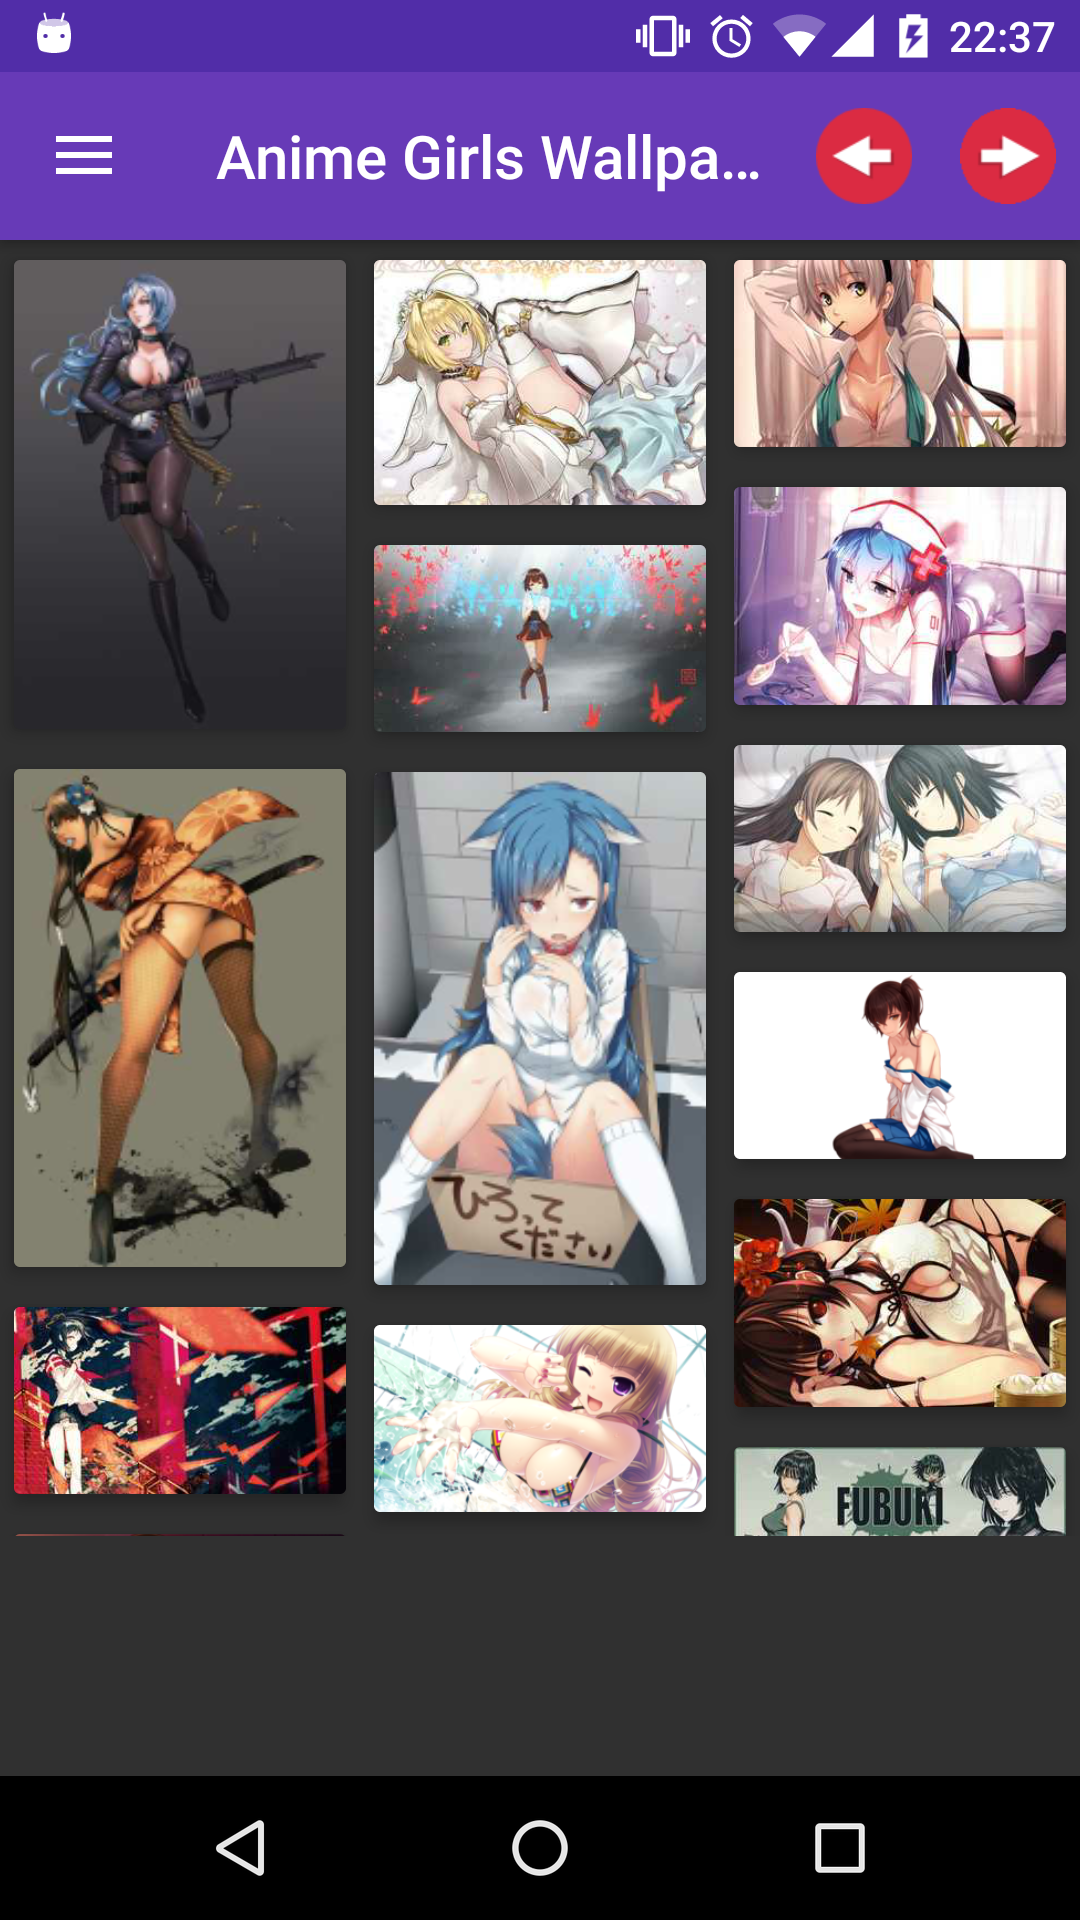 Anime Girls Backgrounds anime,pic,android,editor,puzzles,porn,photo,gallery,adult,photos,strapon,apk,and,sex,app,panties,hentai,sexy,hentie,backgrounds,caprice,girls,manga,wallpapers,apps